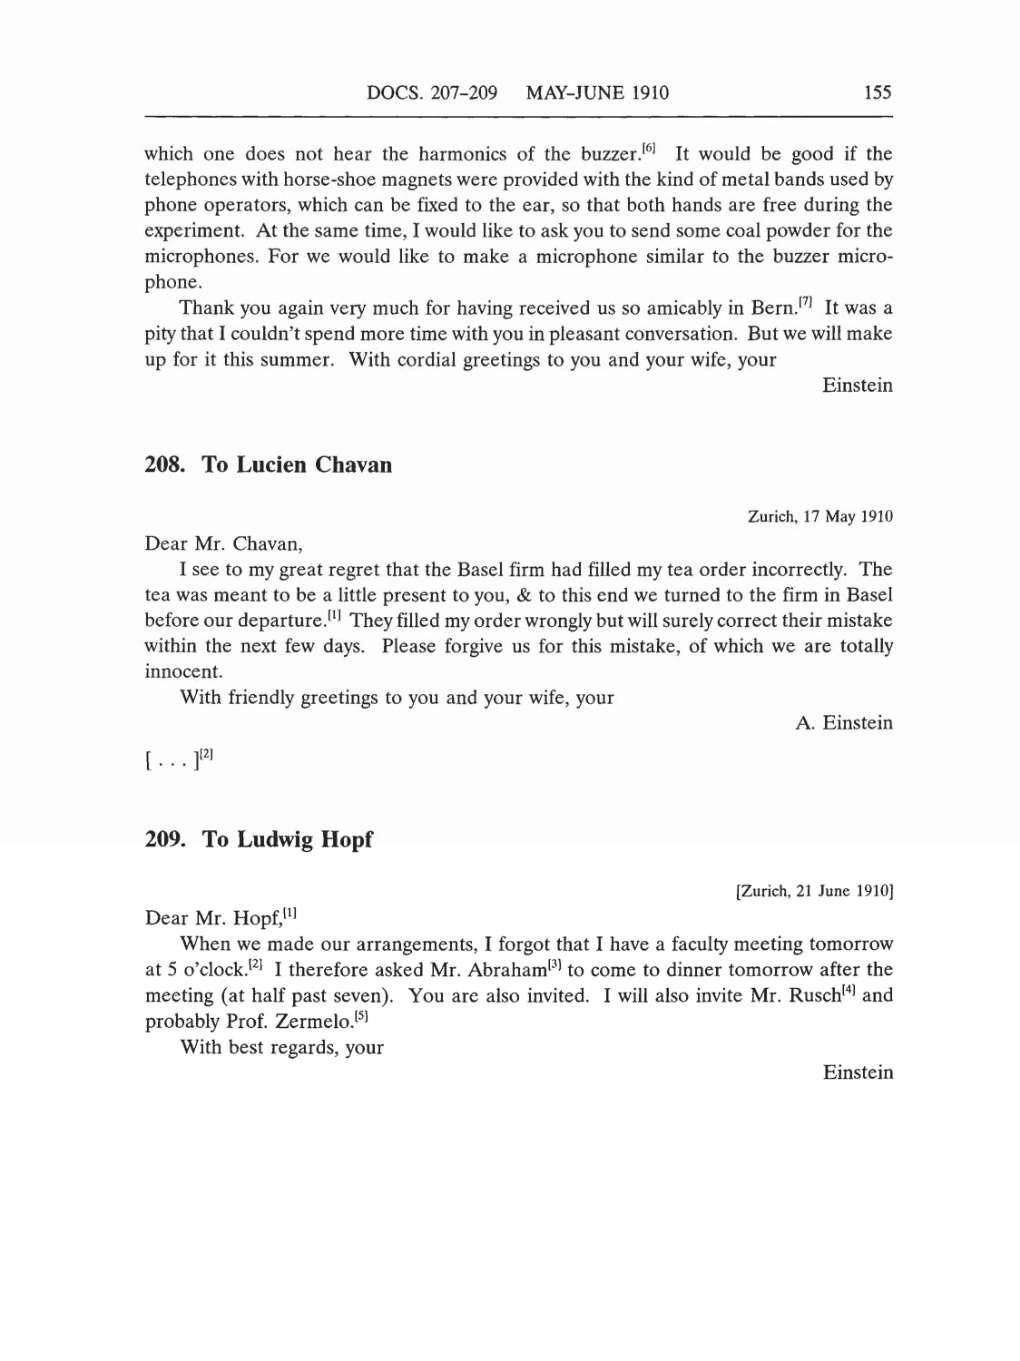 Volume 5: The Swiss Years: Correspondence, 1902-1914 (English translation supplement) page 155